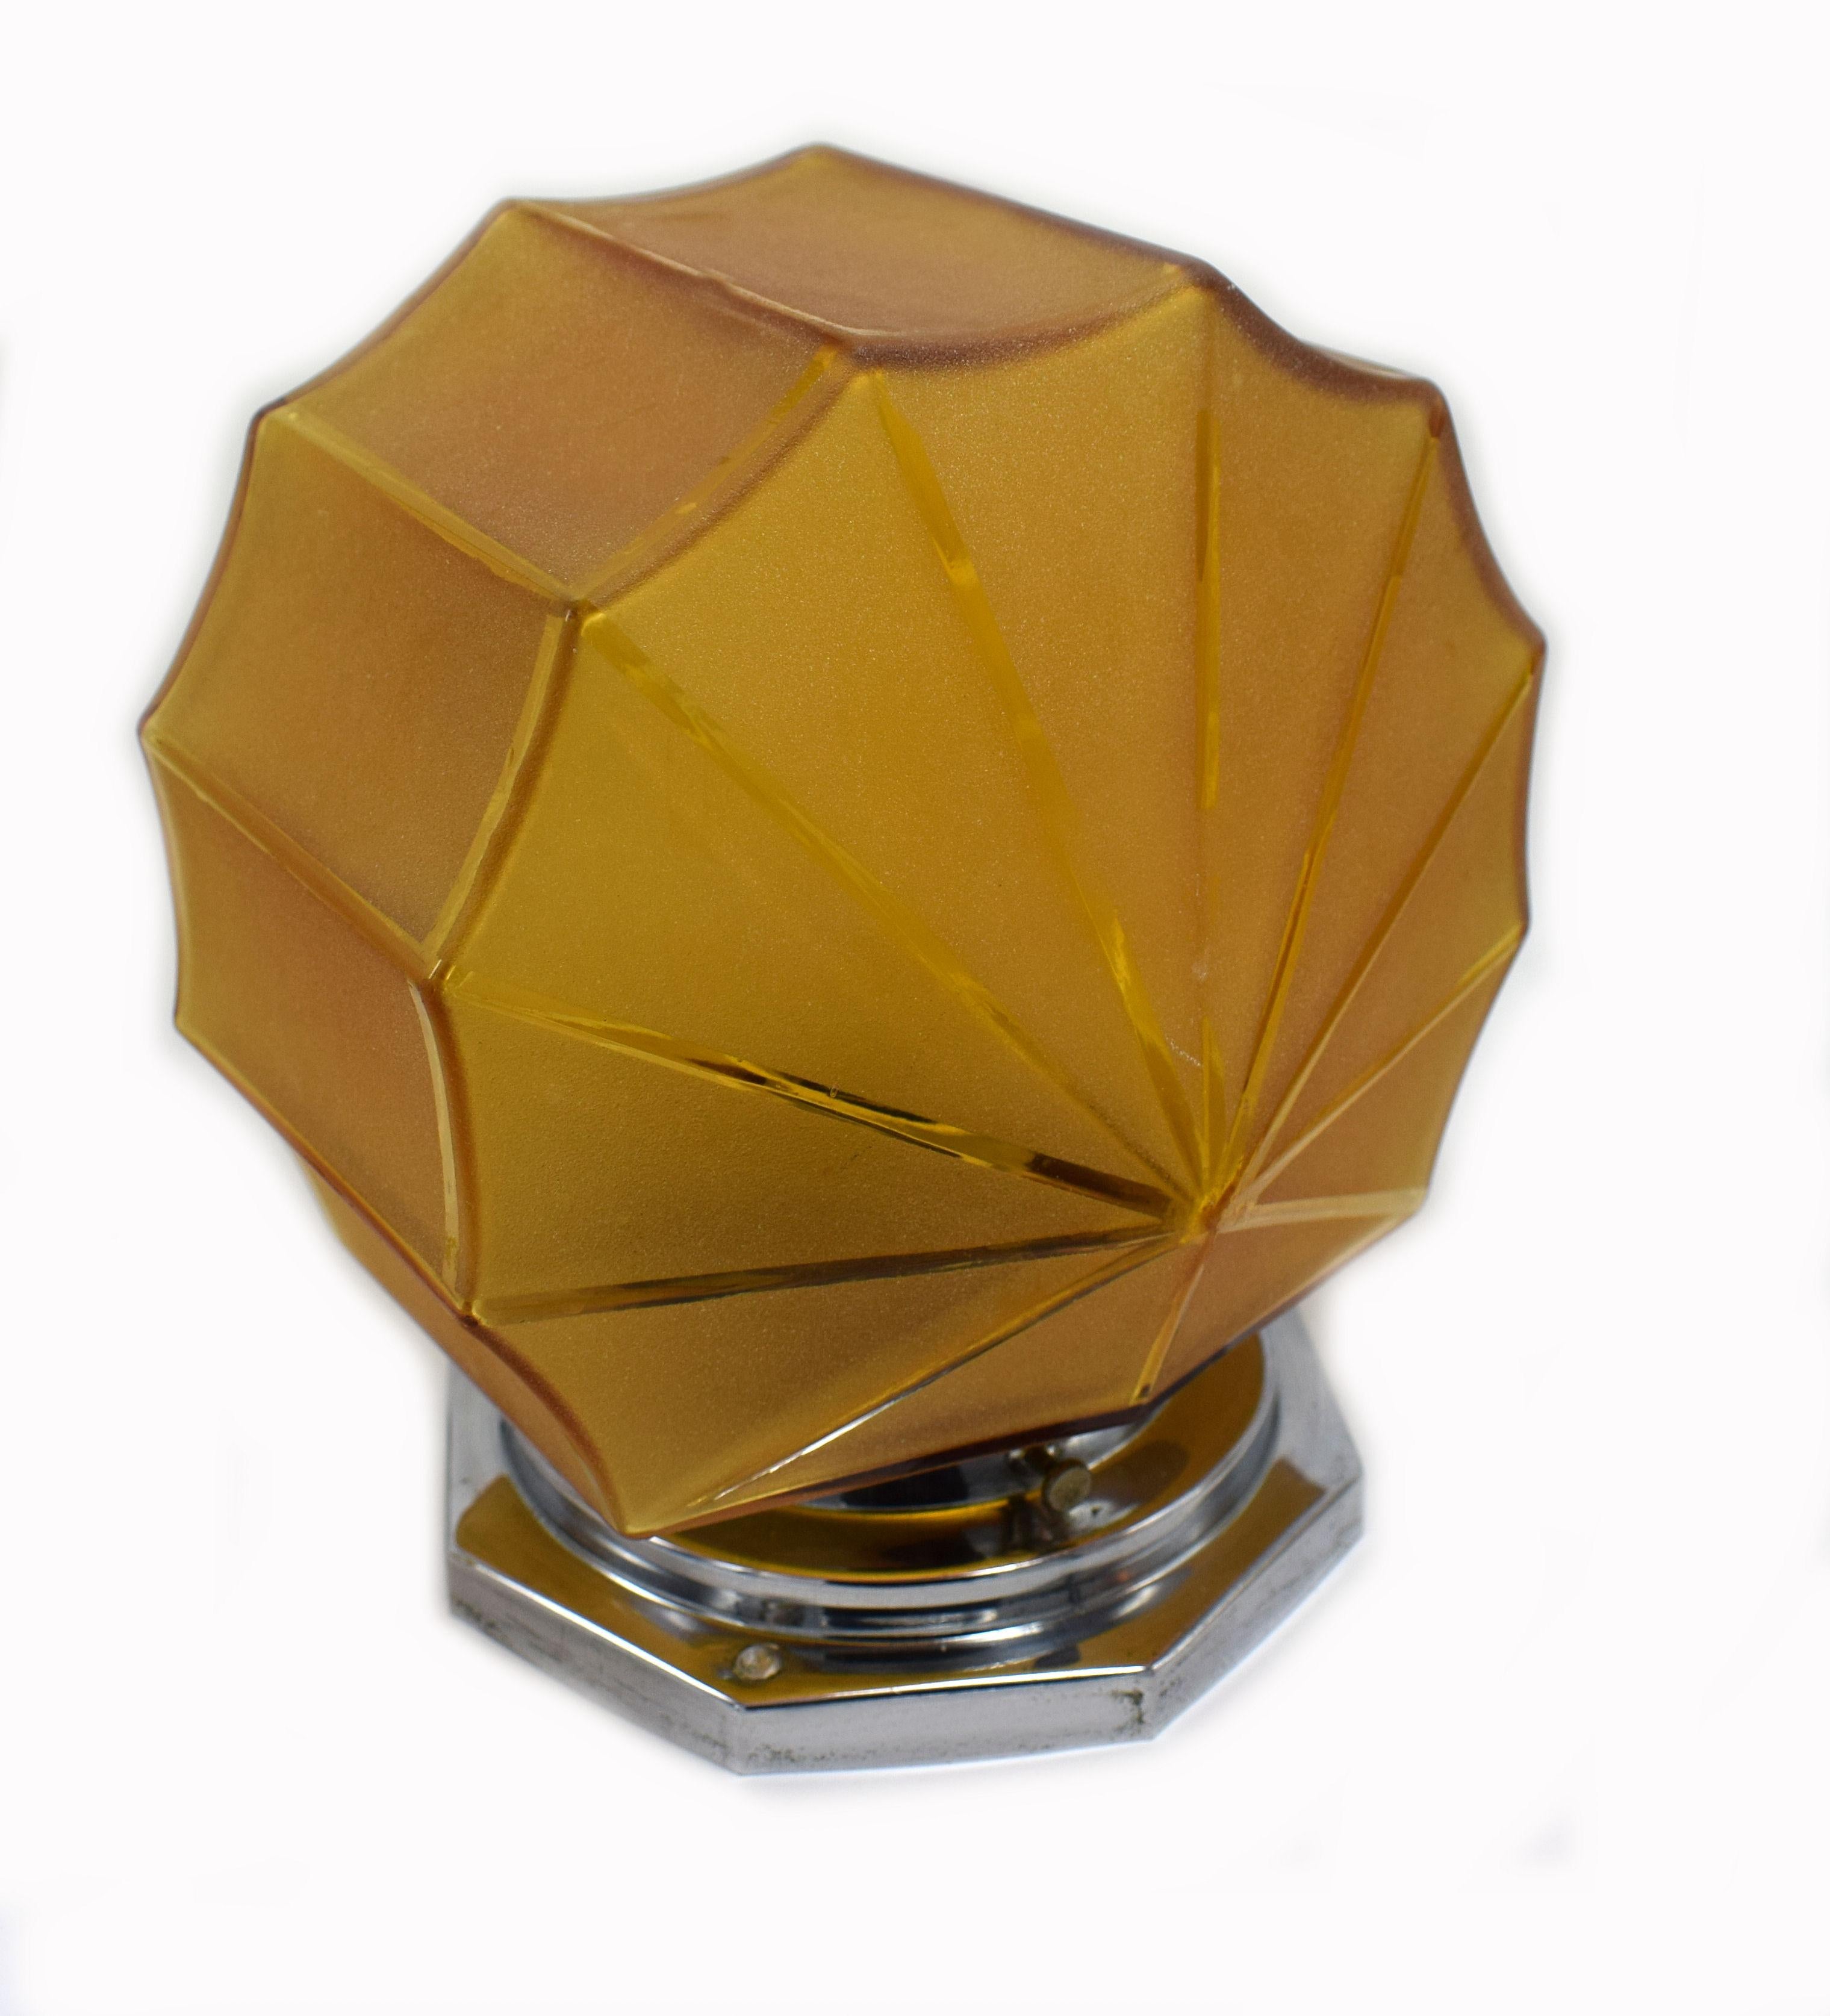 Fabulous 1930s Art Deco ceiling light that sits flush to the ceiling. Wonderful design that can't be mistaken for any other era, segmented panels that together give a fan shape with slightly scolloped edges. The glass is a sepia tone and slightly